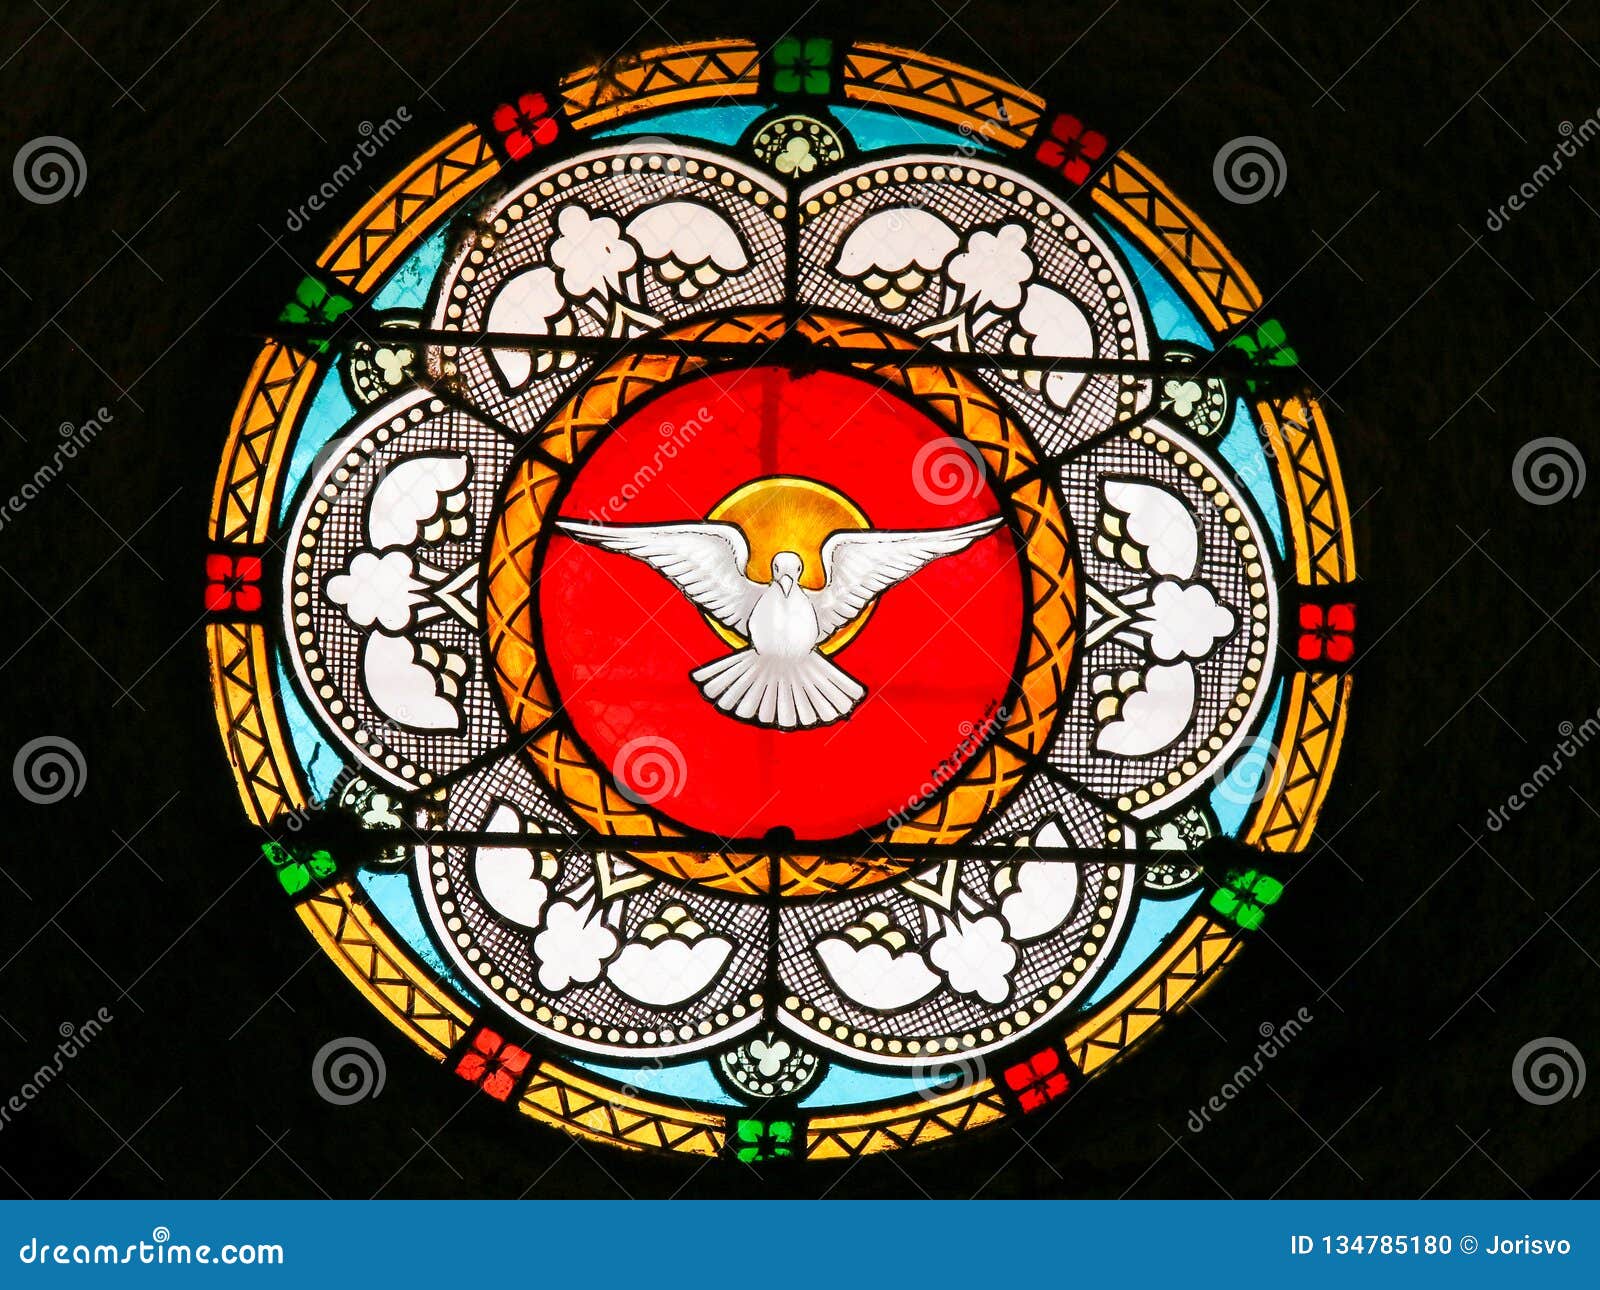 dove, holy spirit - stained glass in antibes church